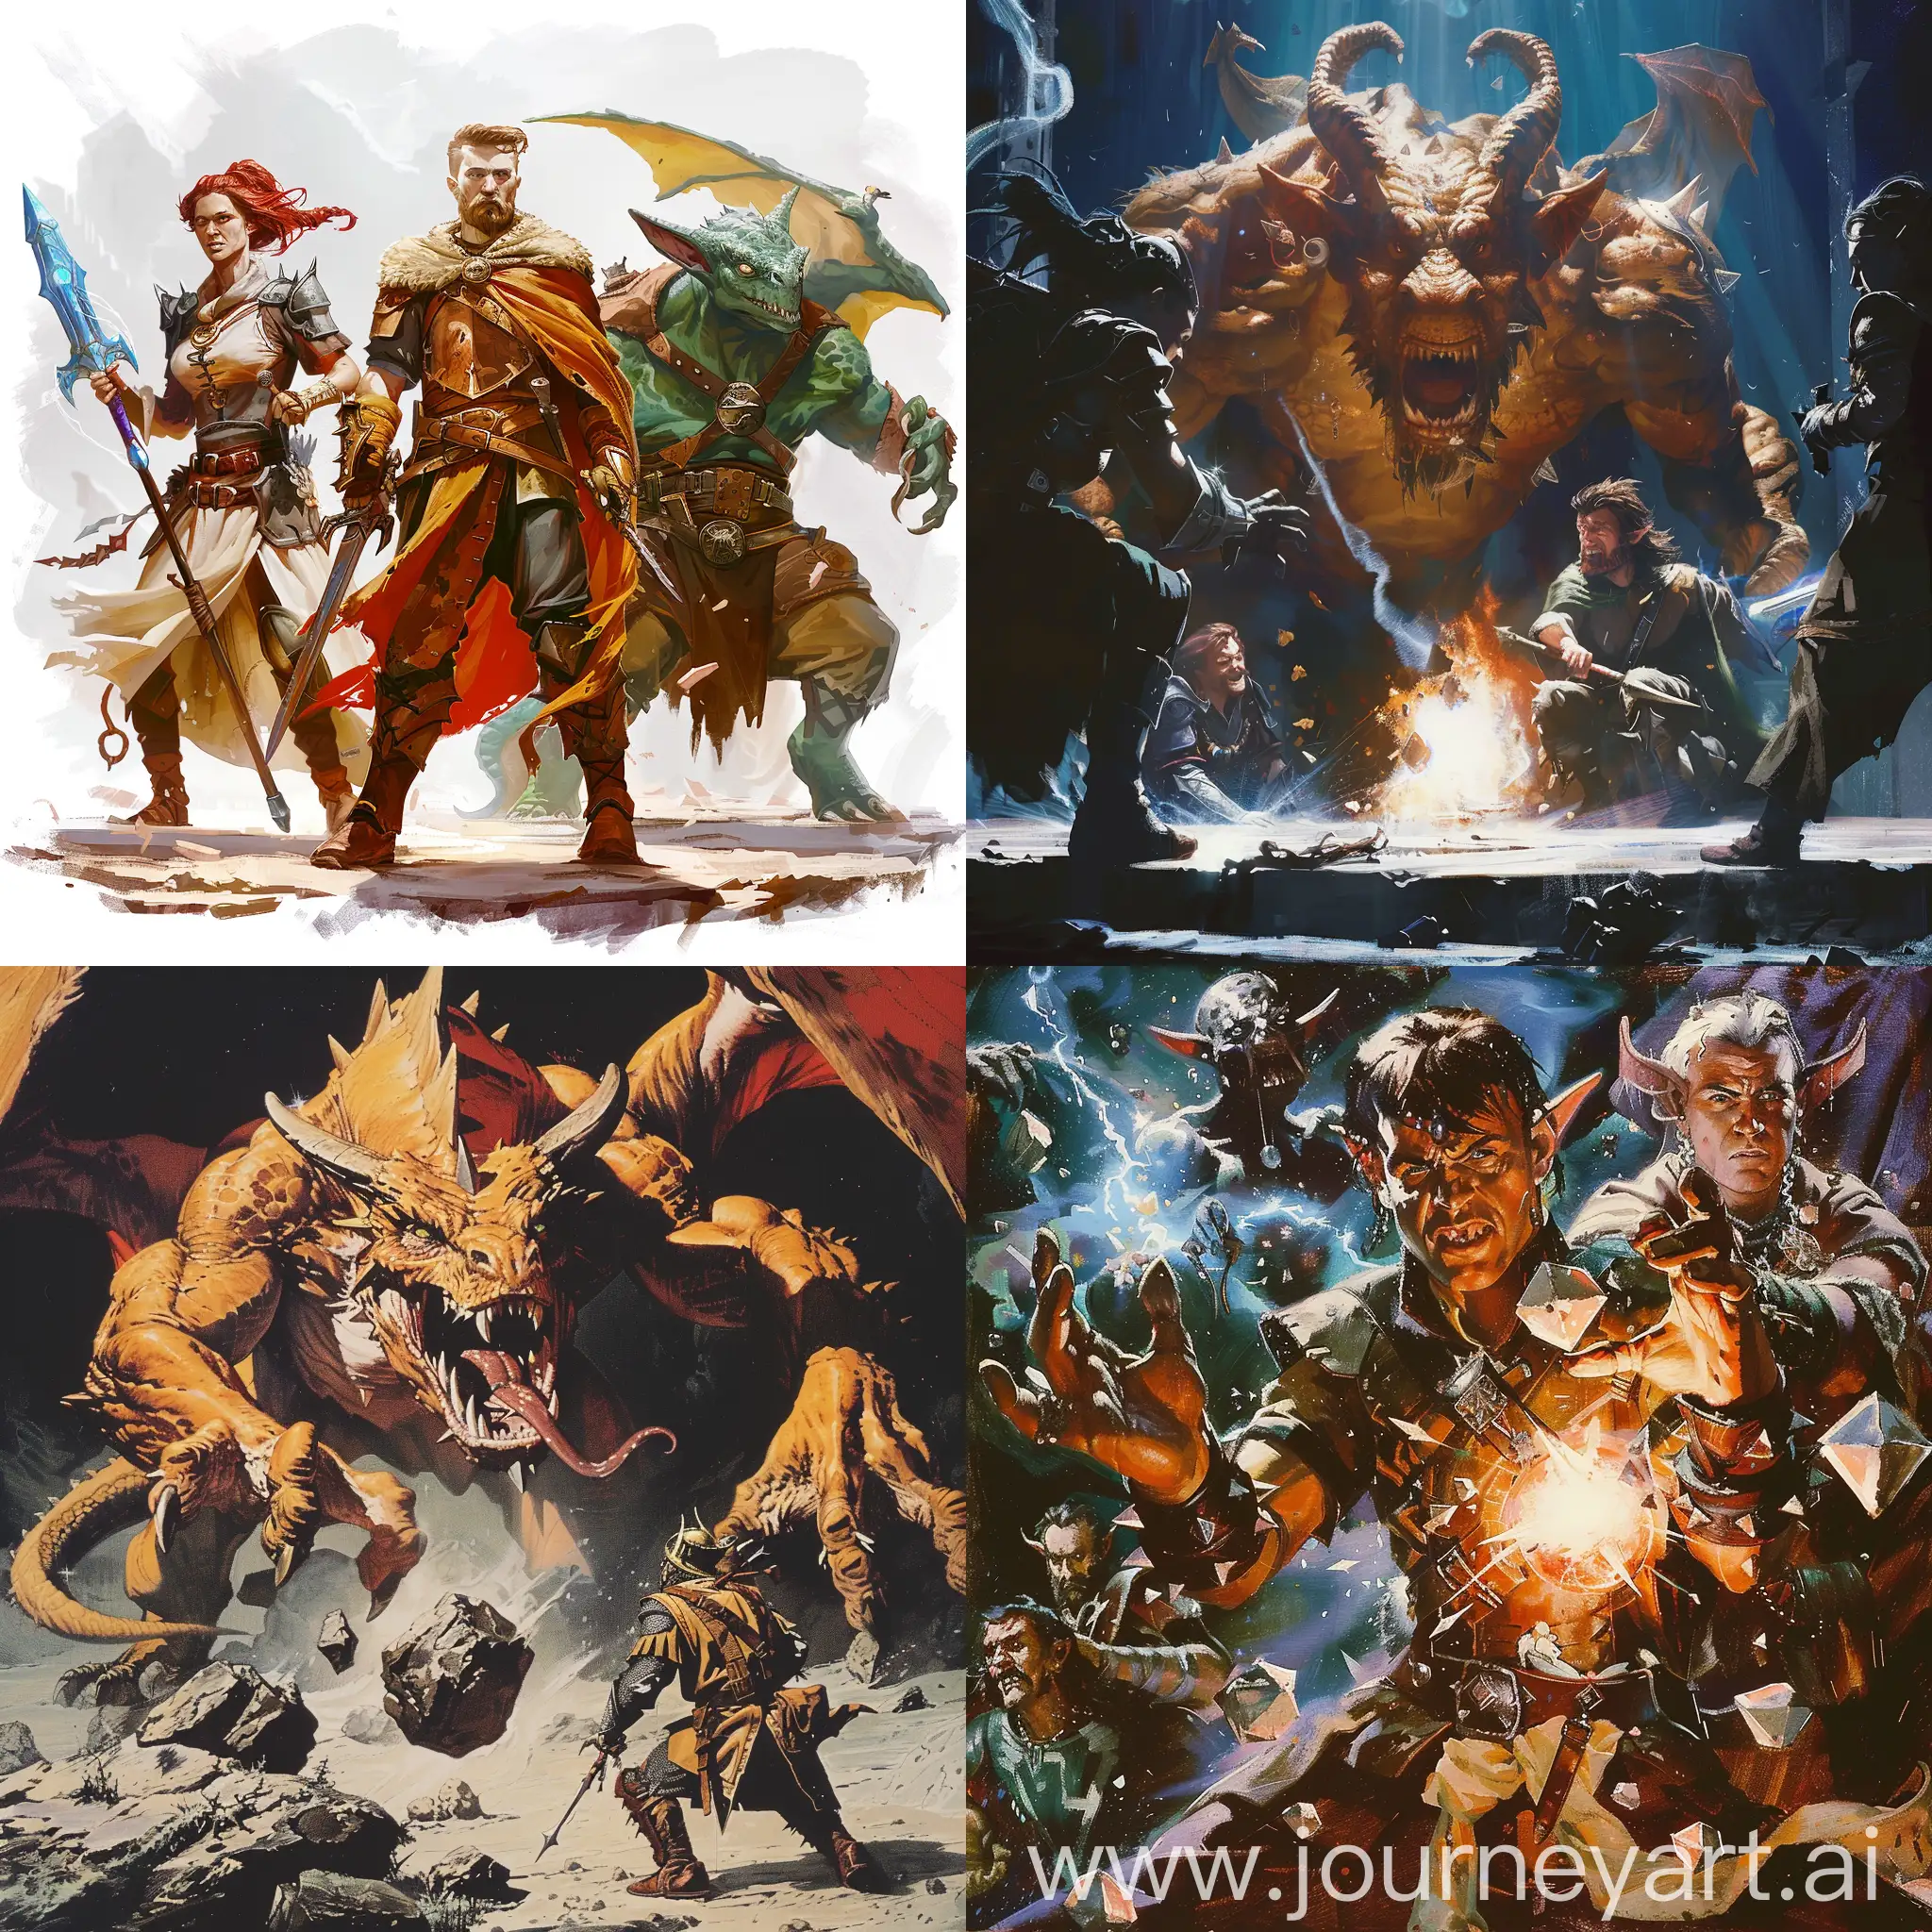 Epic-Dungeons-and-Dragons-NFT-Adventure